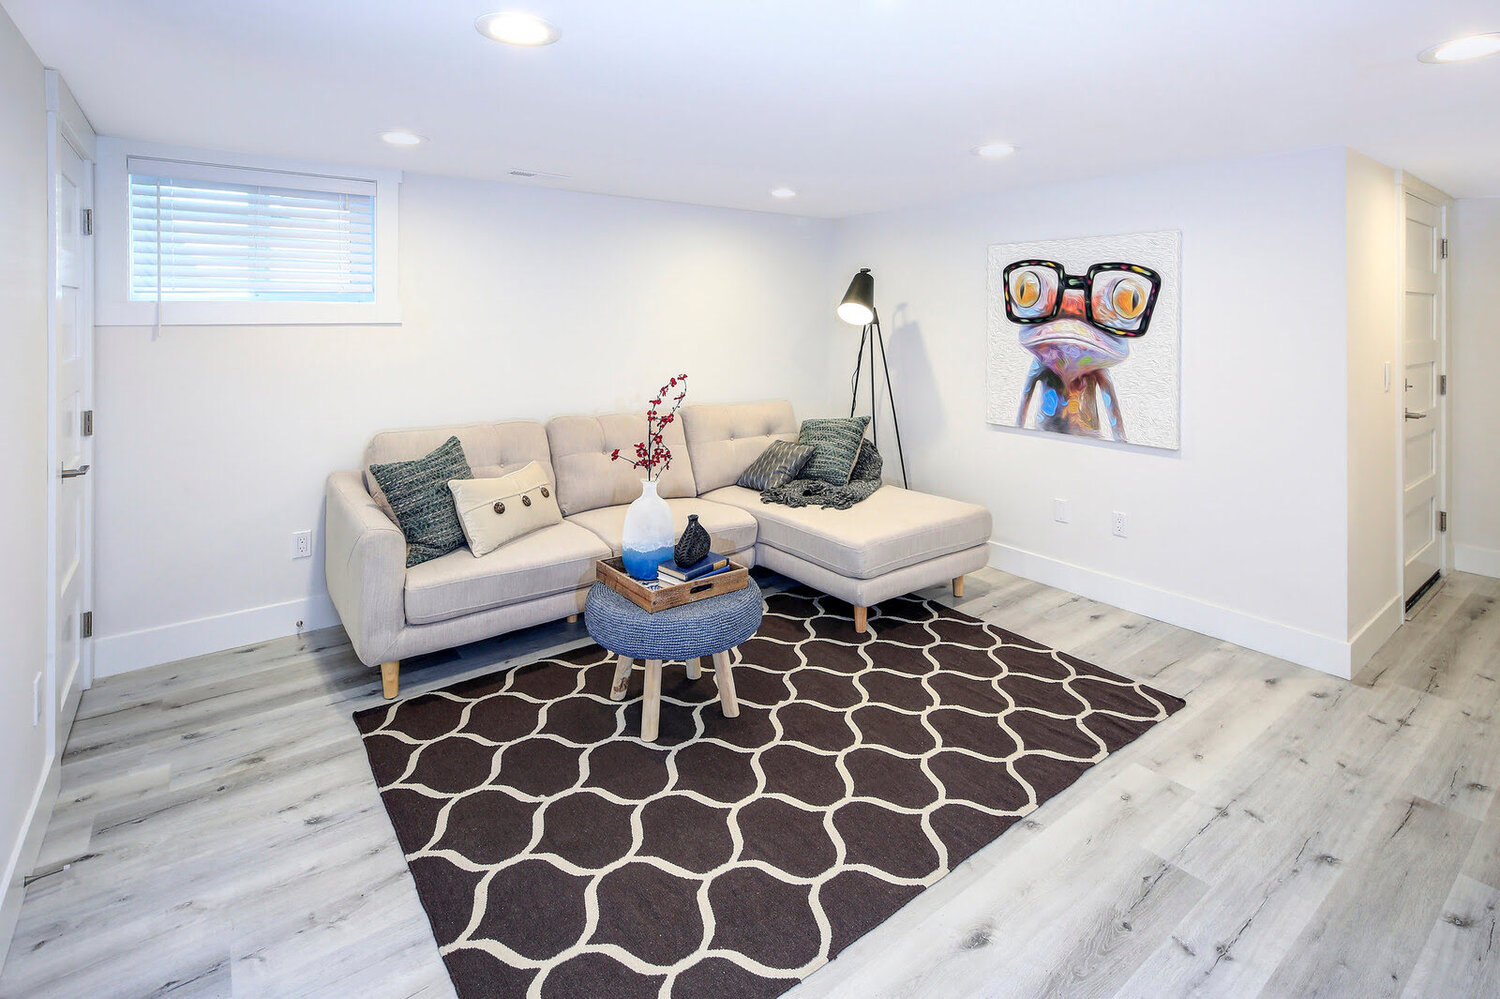 Basement Flooring Ideas: 10 Ways To Get A Stylish And Functional Finish